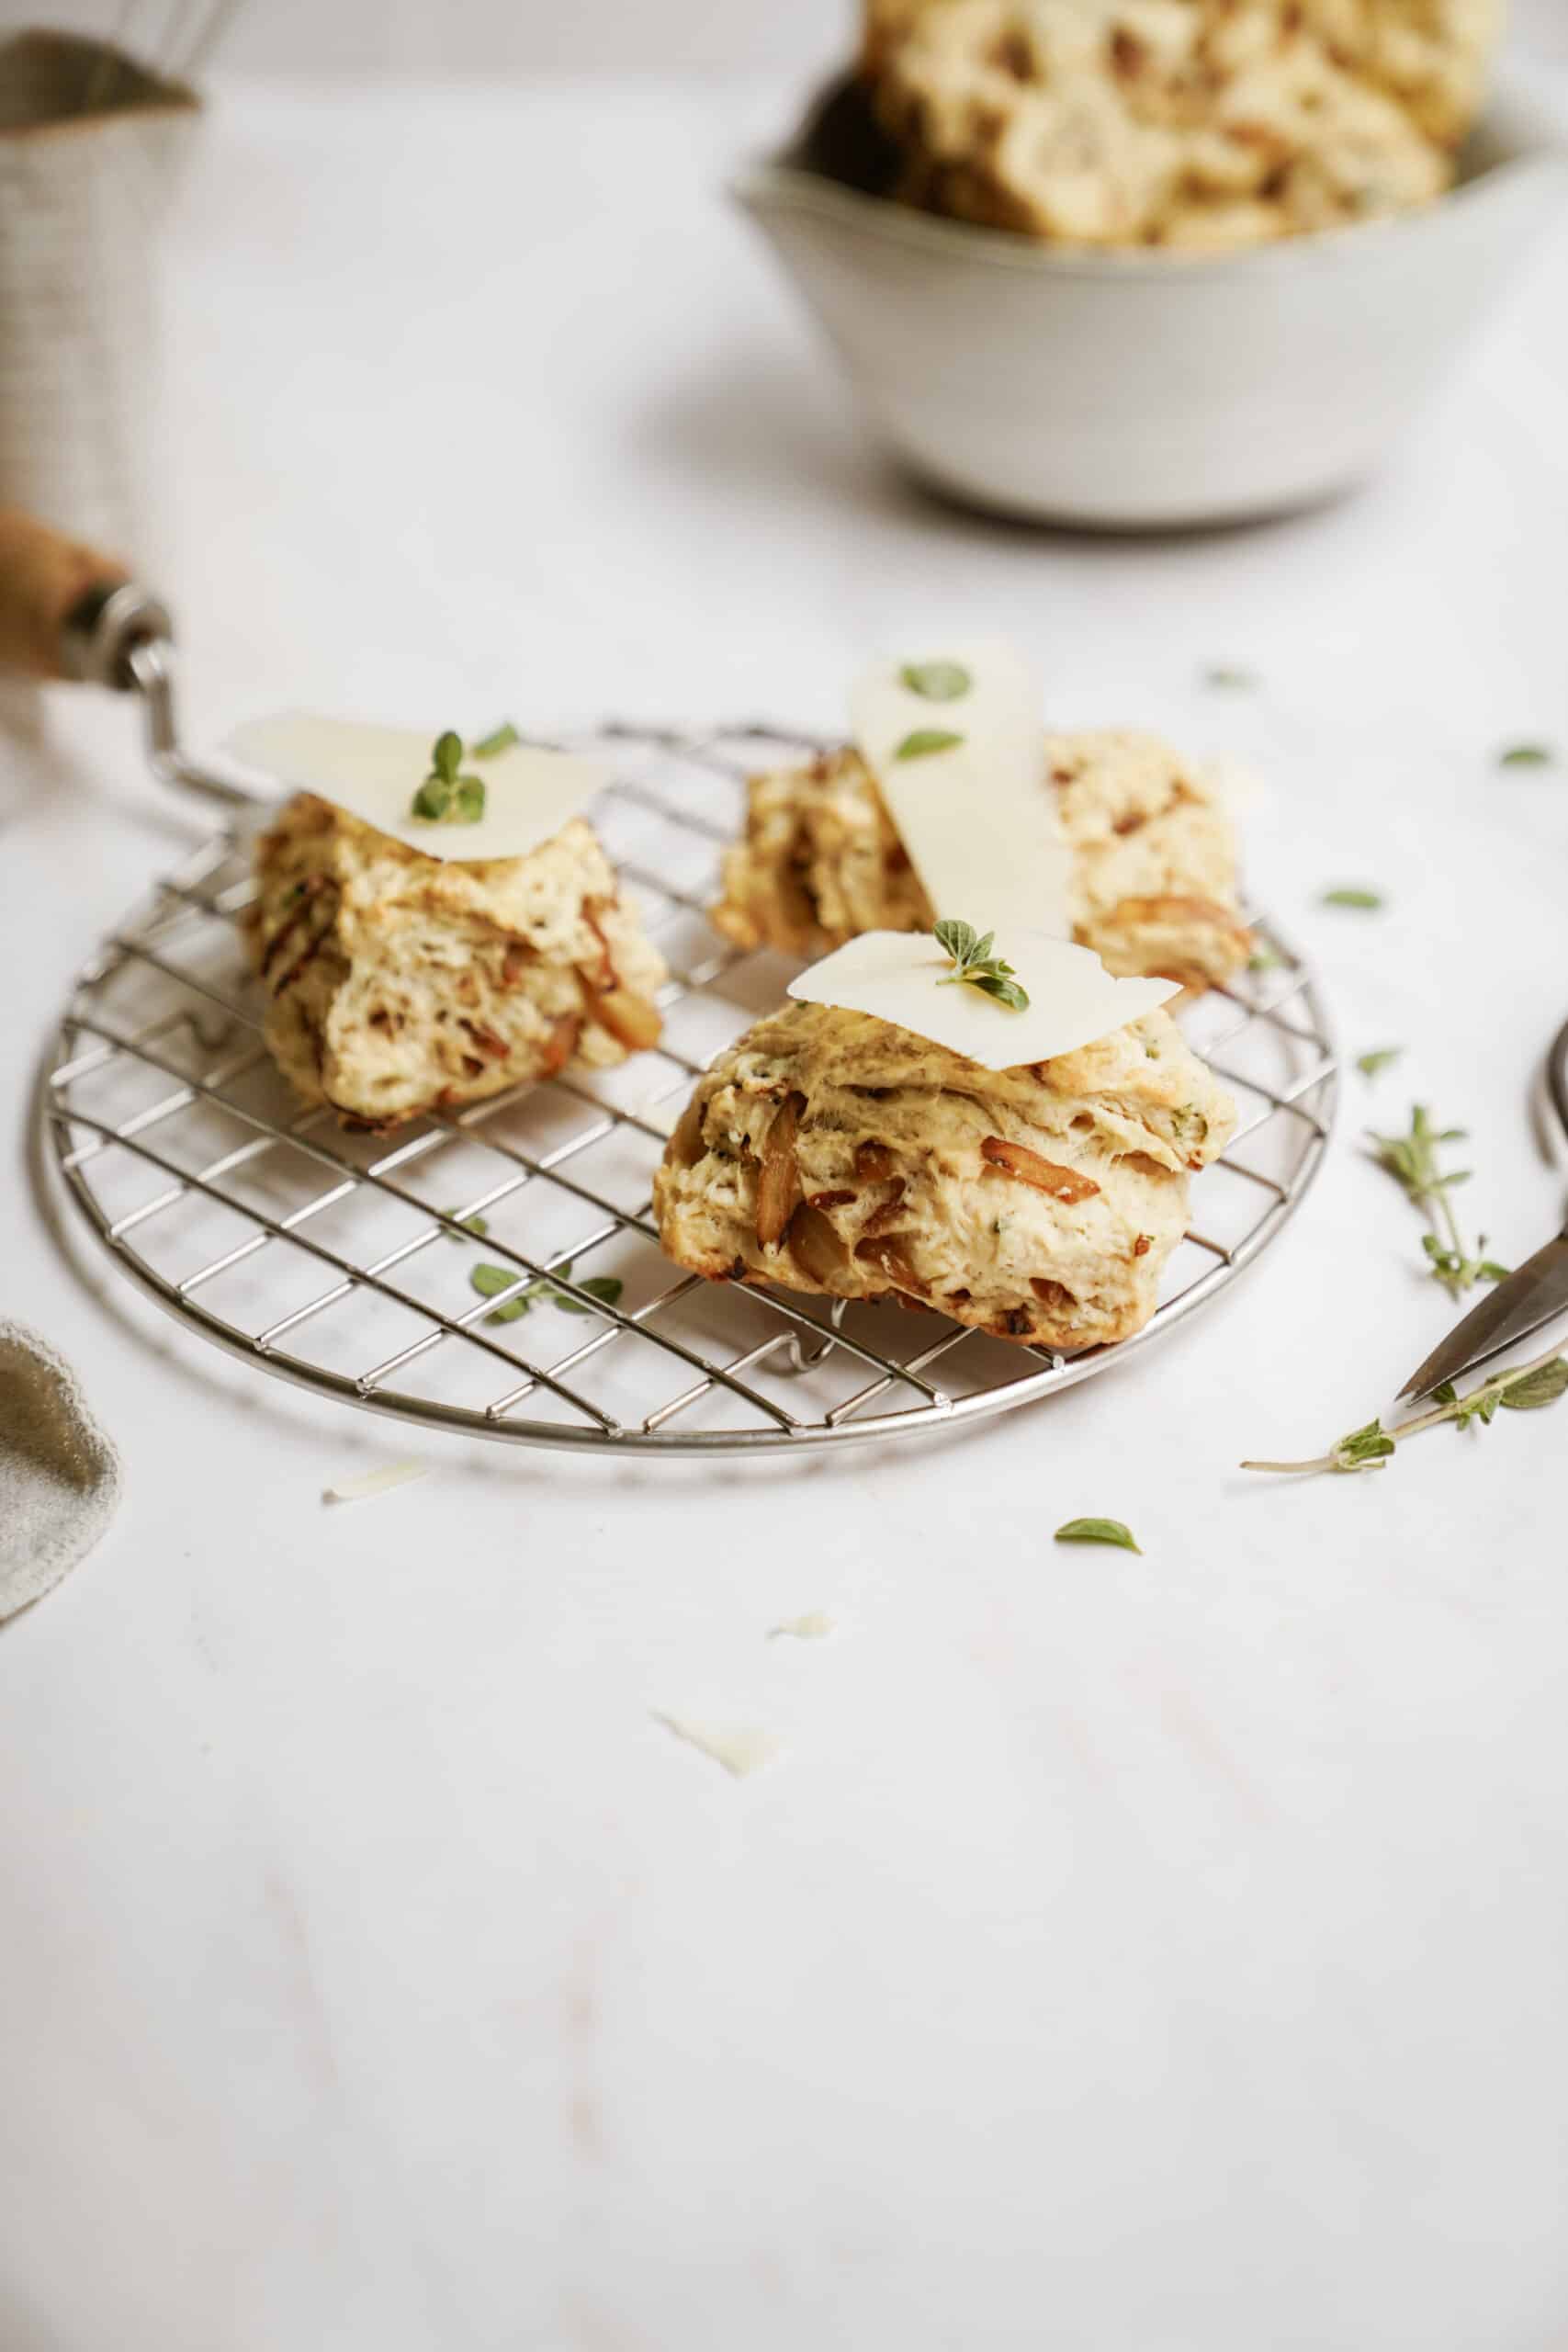 Vegan biscuits on a drying rack